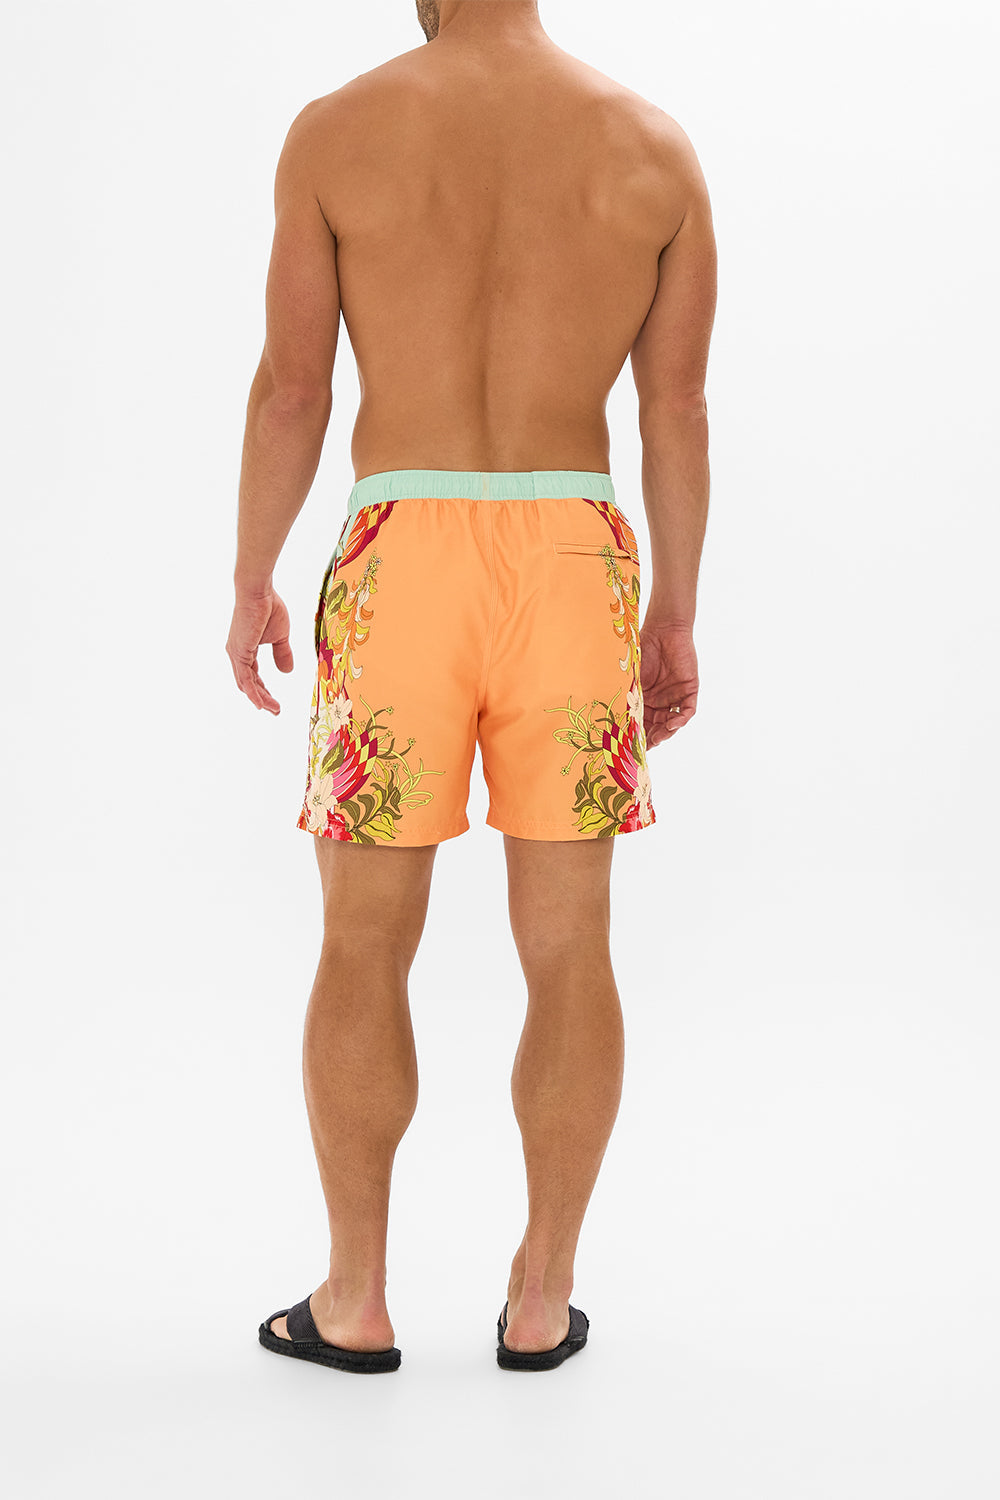 Hotel Franks by CAMILLA floral mid length boardshort in The Flower Child Society